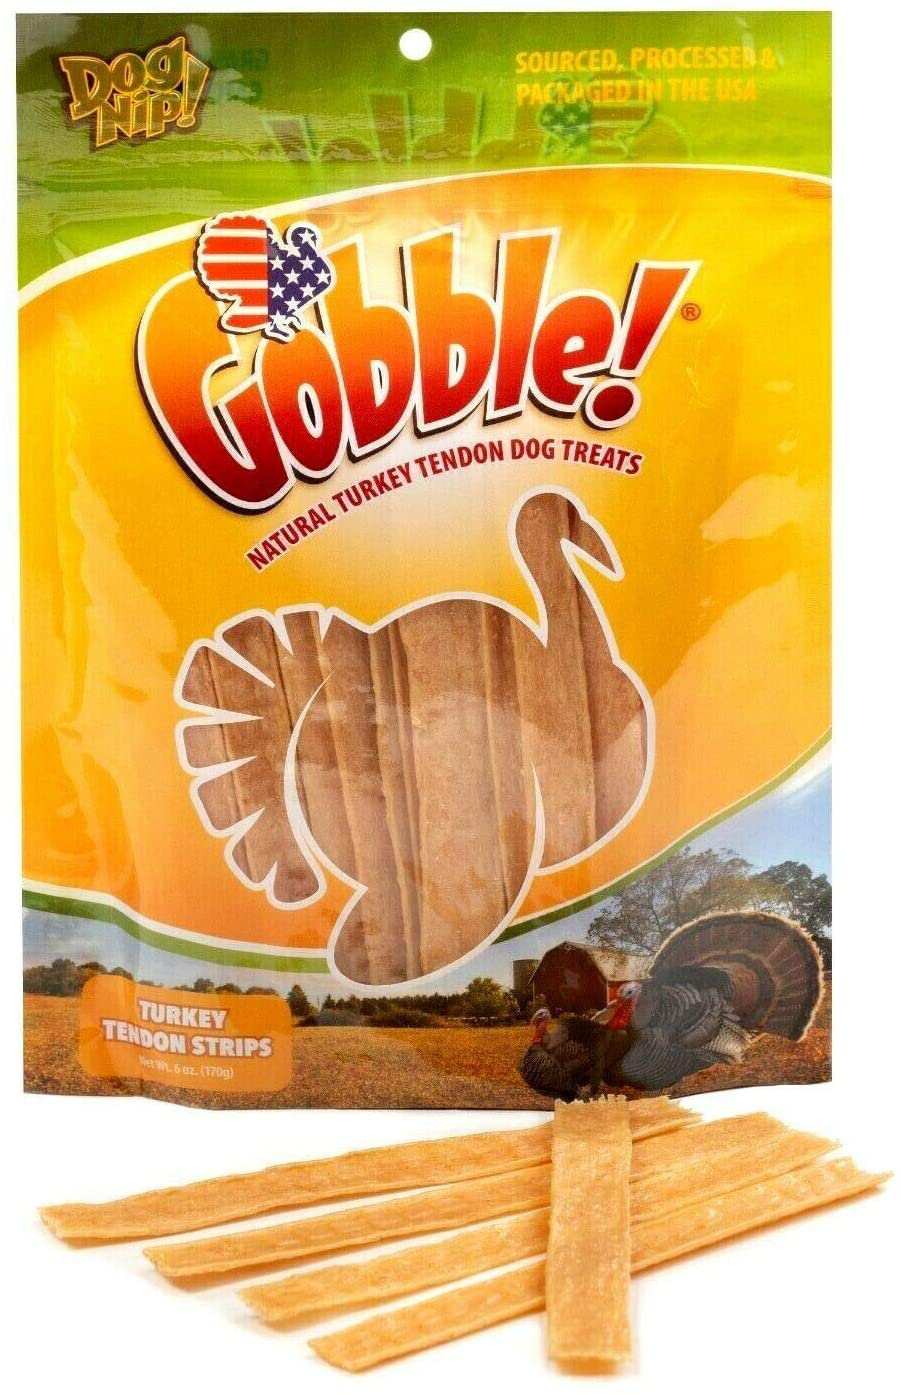 Gobble! 6-Inch Turkey Tendon for Dogs, Made in USA, 6 Oz. (170G) Reseal Value Bags, All-Natural Hypoallergenic Dog Chew Treat |Sourced, Processed & Packaged in the USA | Animals & Pet Supplies > Pet Supplies > Dog Supplies > Dog Treats Dog Nip! Strips (45-50 Pieces)  